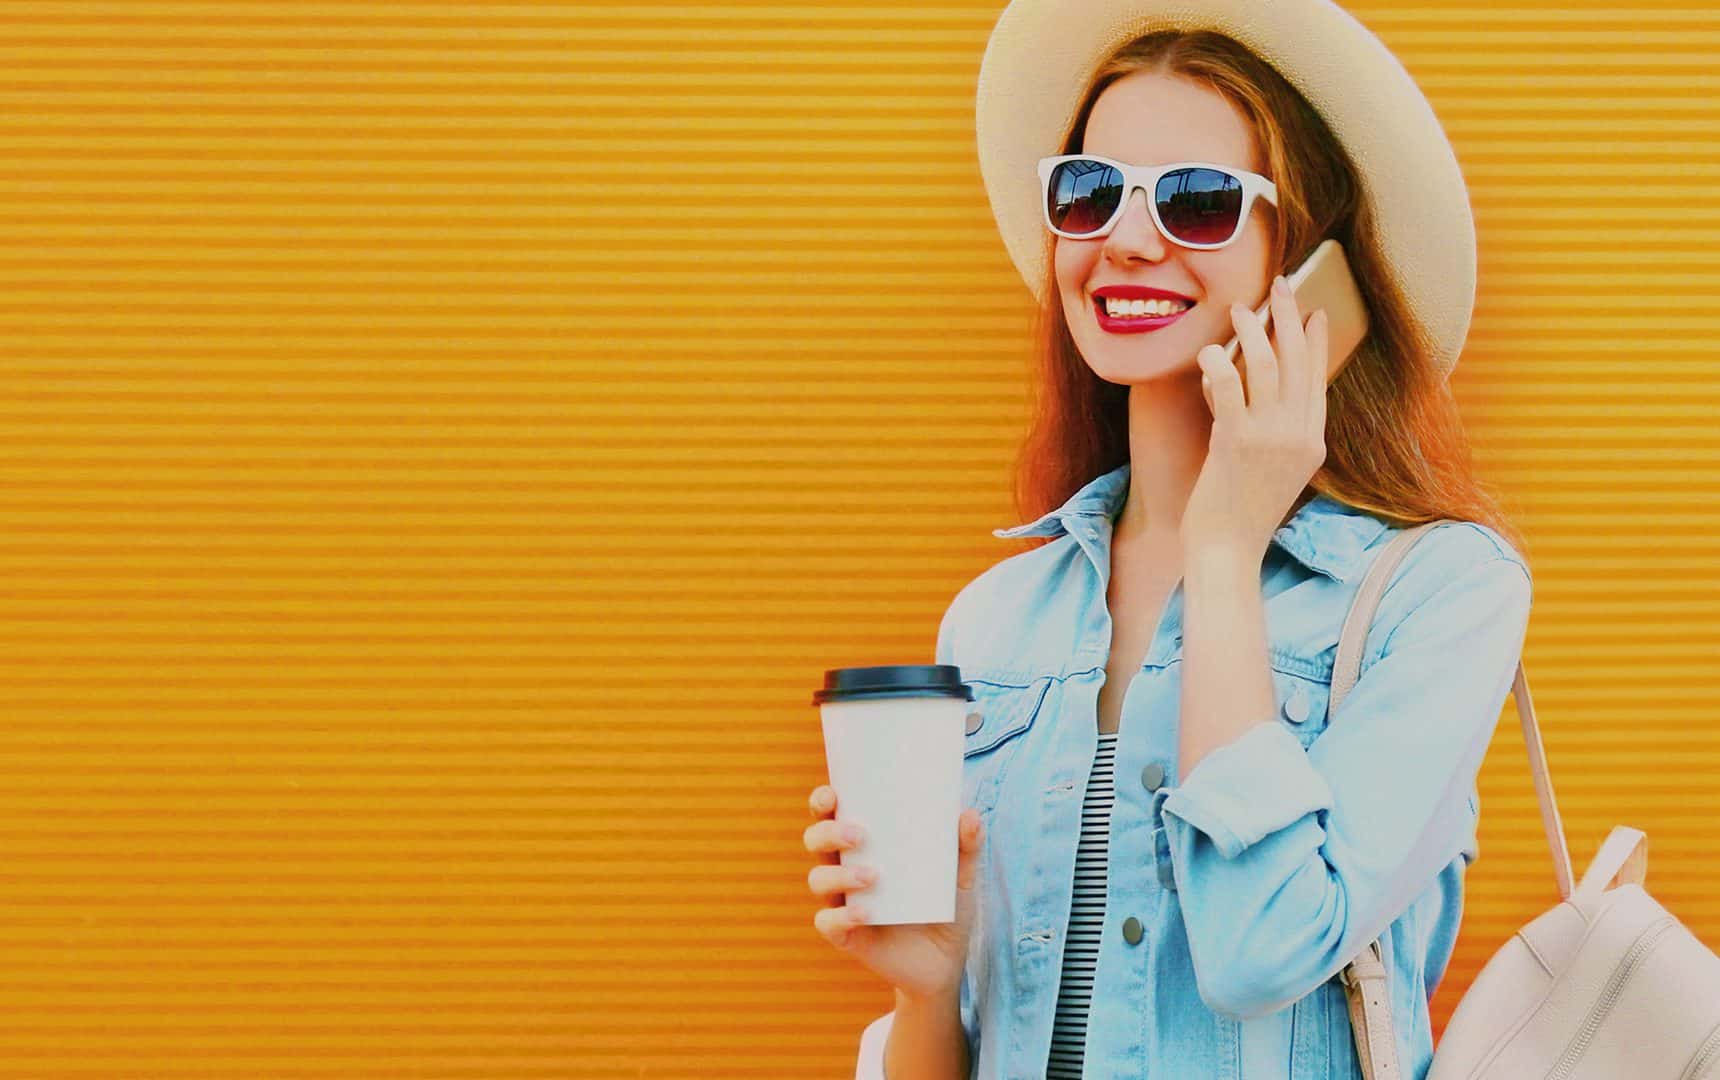 Woman smiling while on the phone against orange background